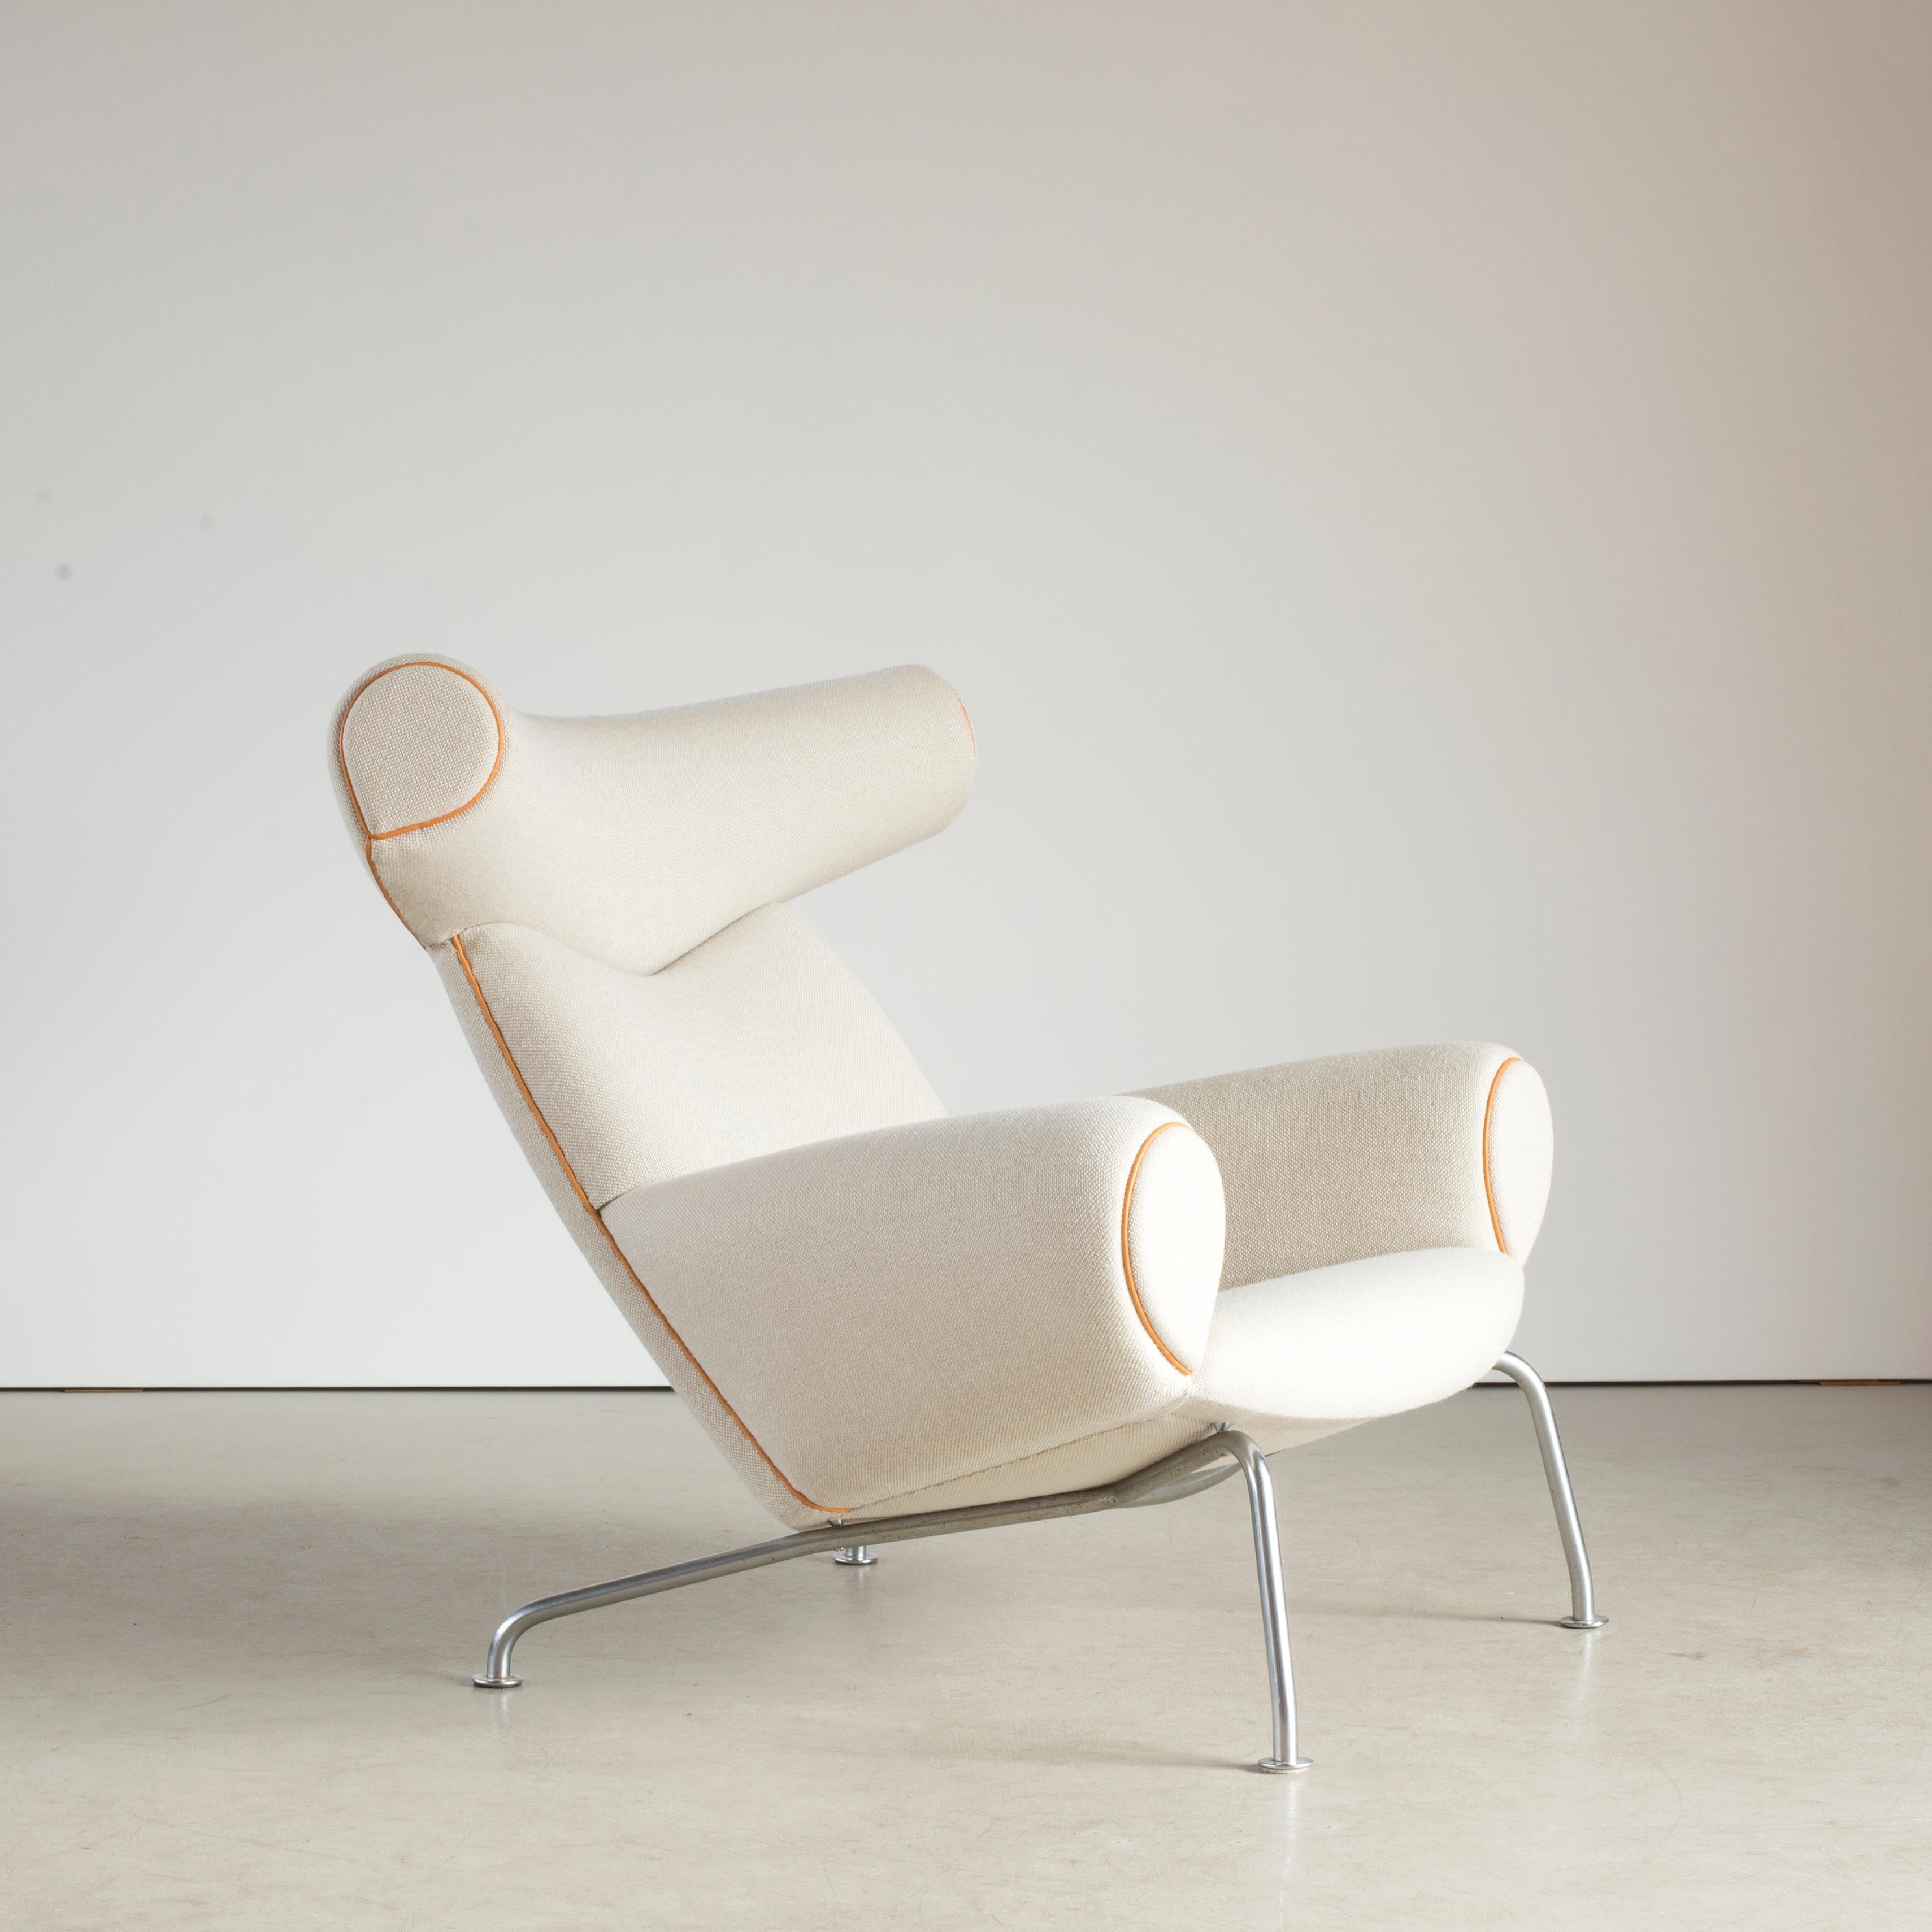 Hans J. Wegner 'Ox-chair' model AP-46. Easy chair with tubular steel frame. Sides, seat and back upholstred with light fabric with leather edgings.

Executed by AP-Stolen, Copenhagen, Denmark.